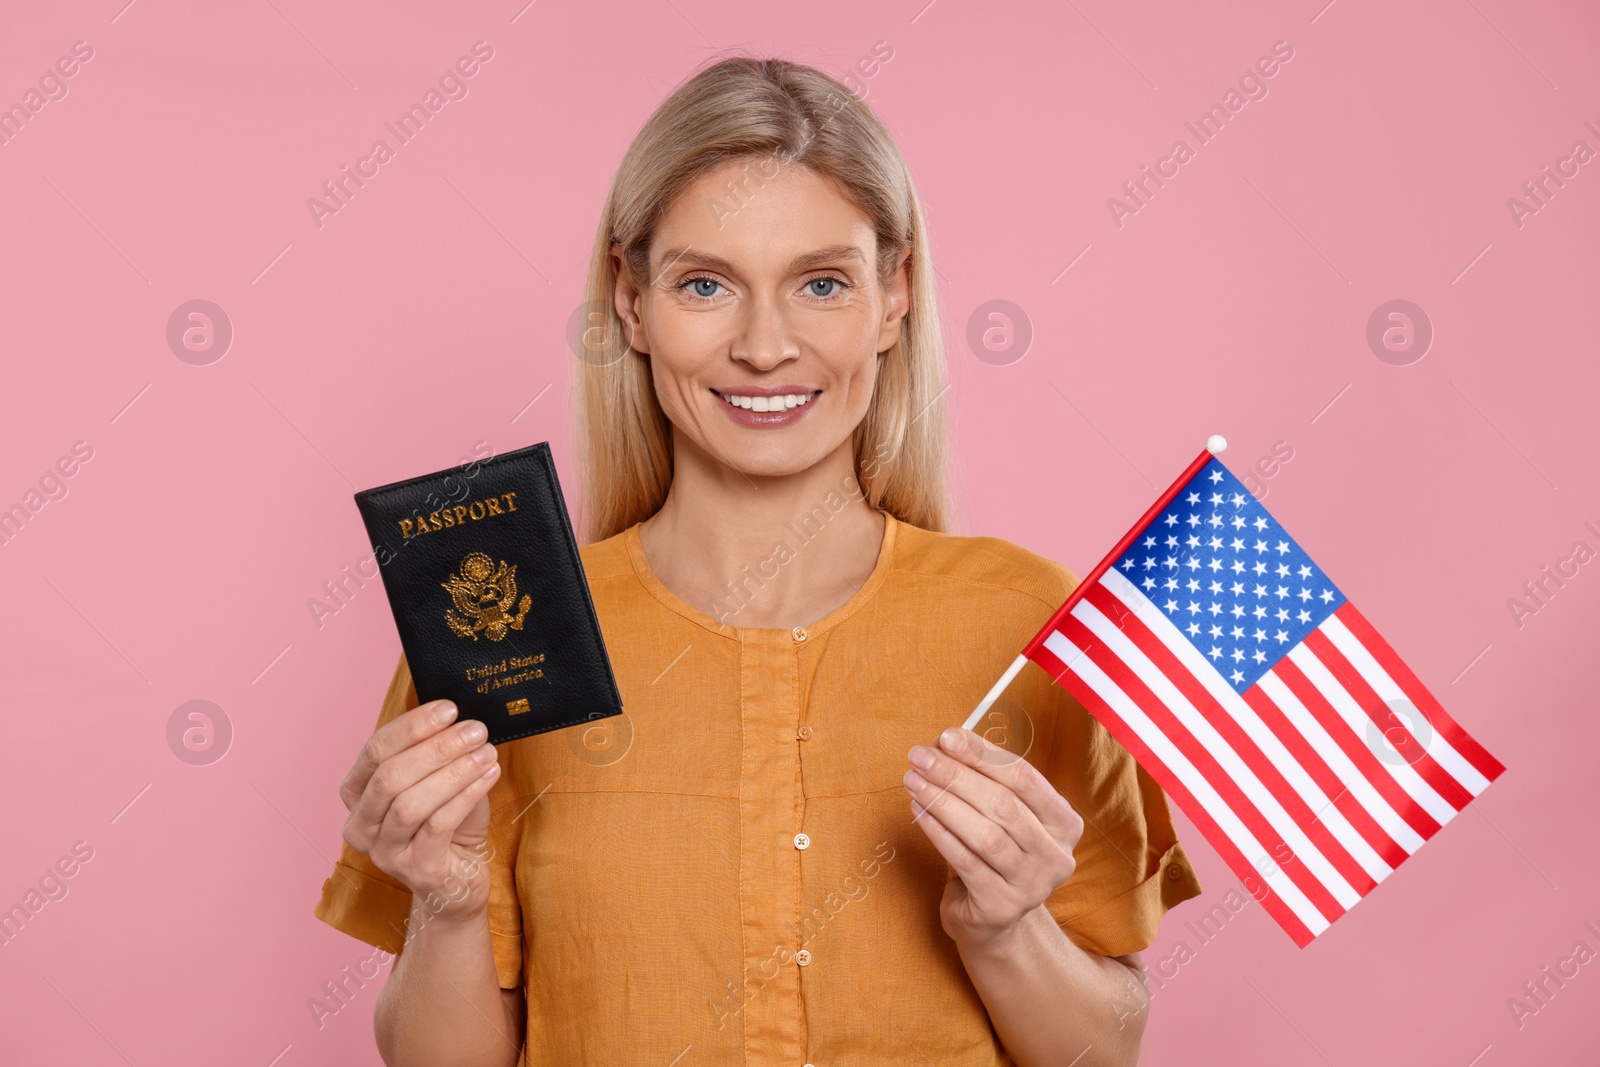 Photo of Immigration. Happy woman with passport and American flag on pink background